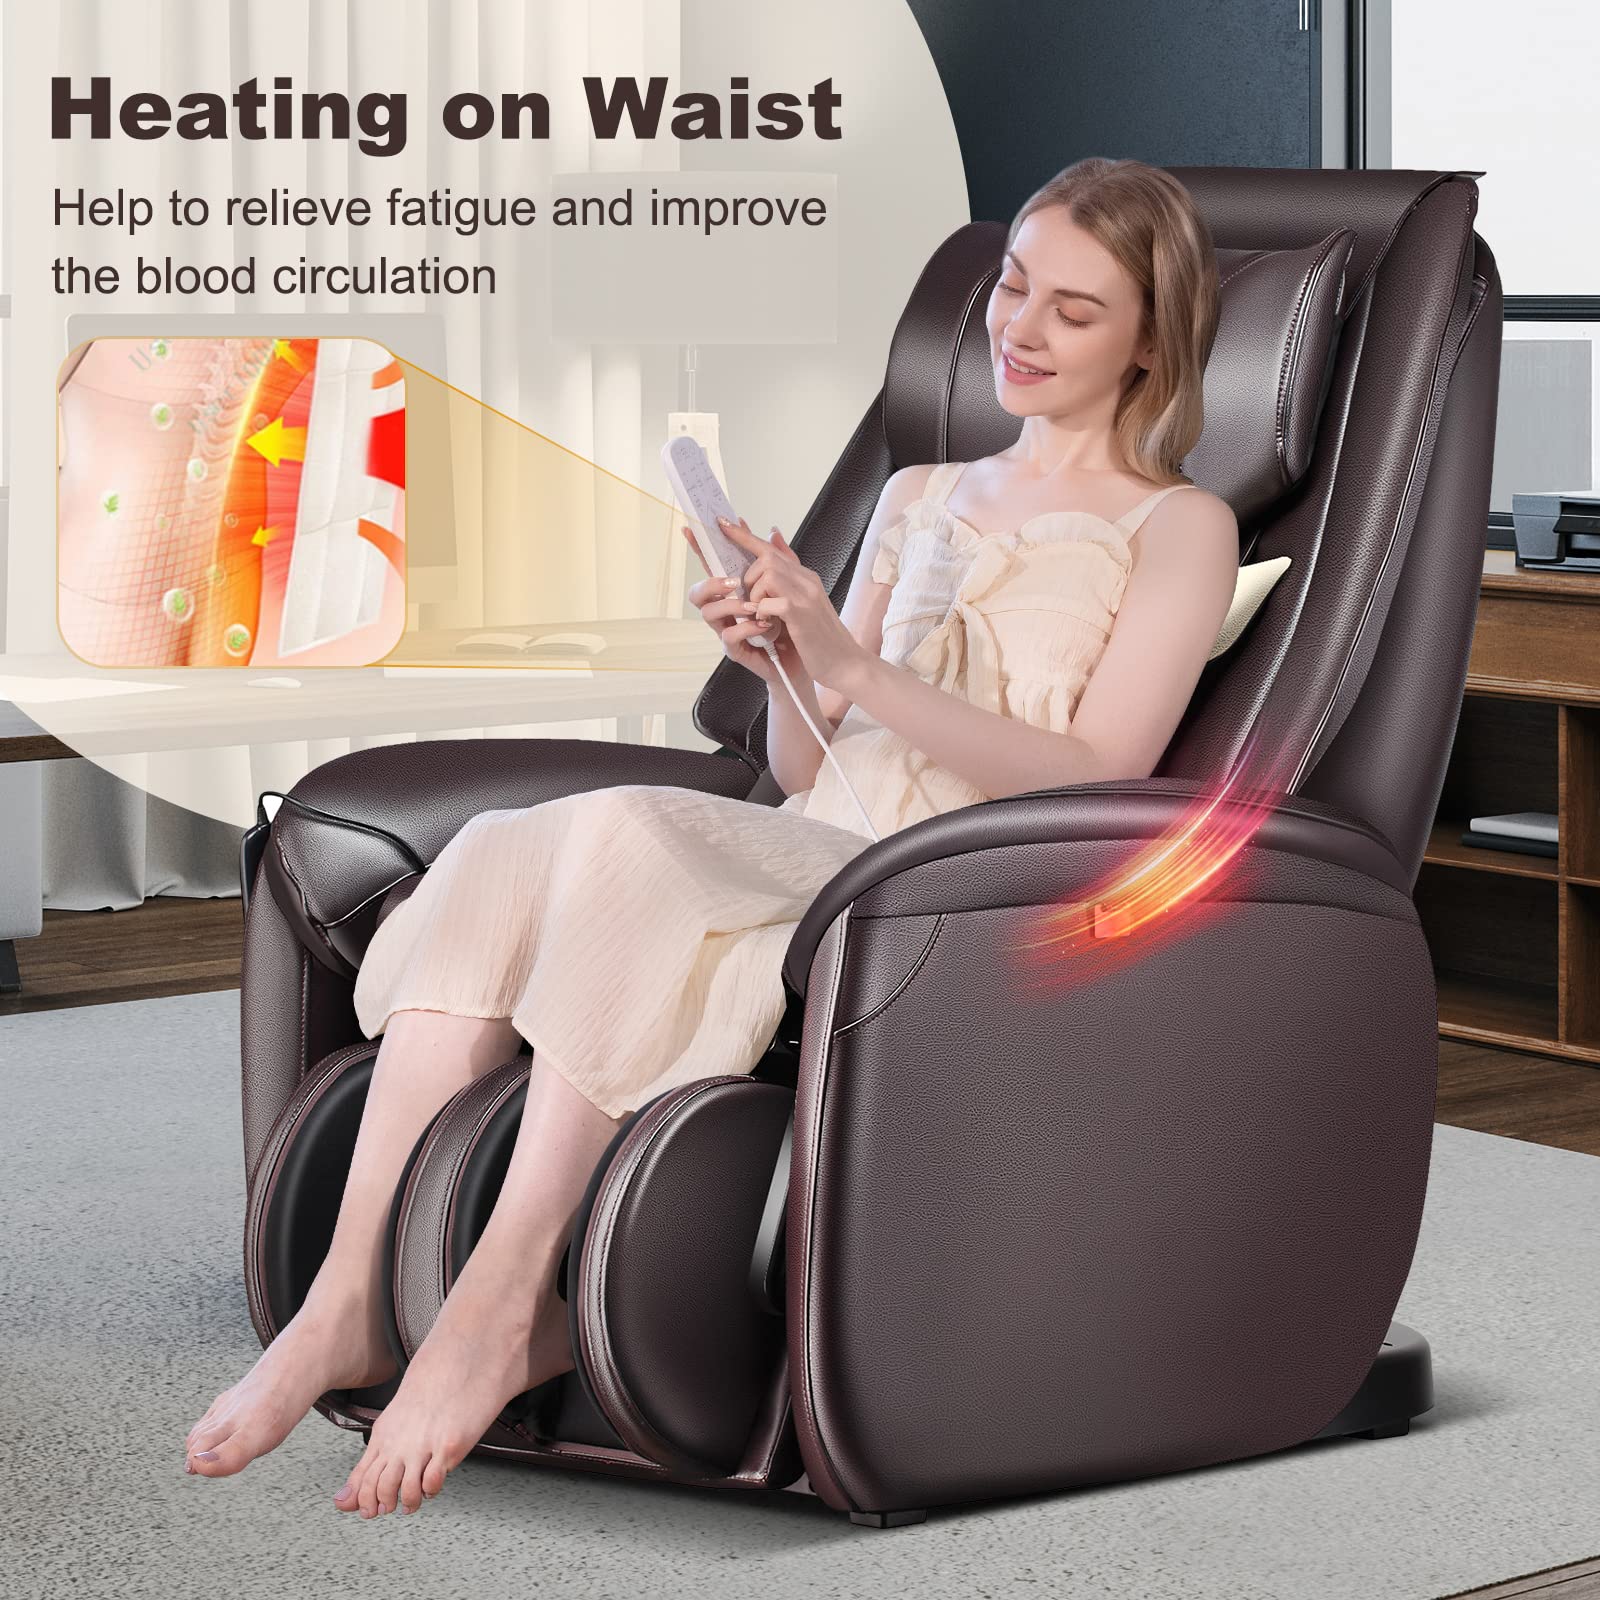 Giantex Full Body Massage Chair - Zero Gravity SL Track Electric Recliner with Reversible Footrest